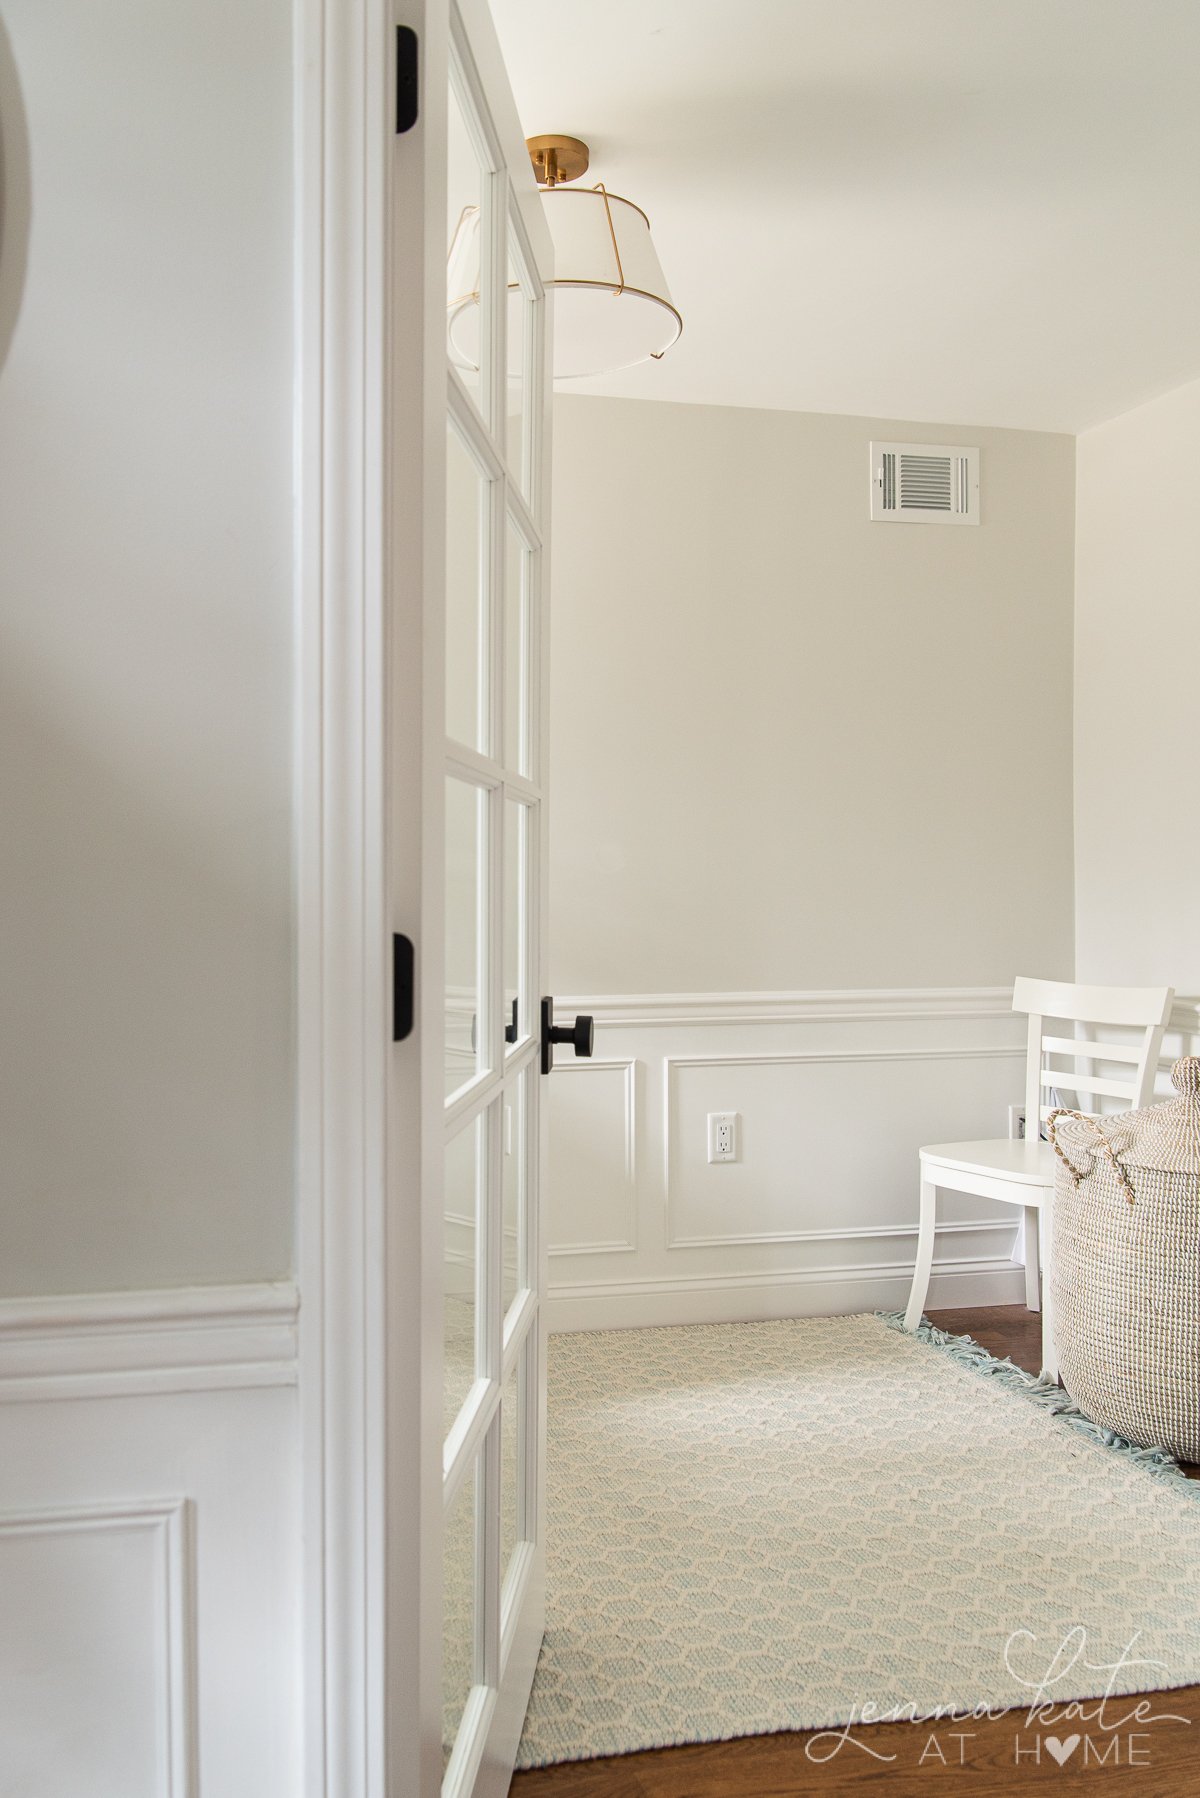 Door open to an office with white board and batten and upper half of walls painted Benjamin Moore Paper White